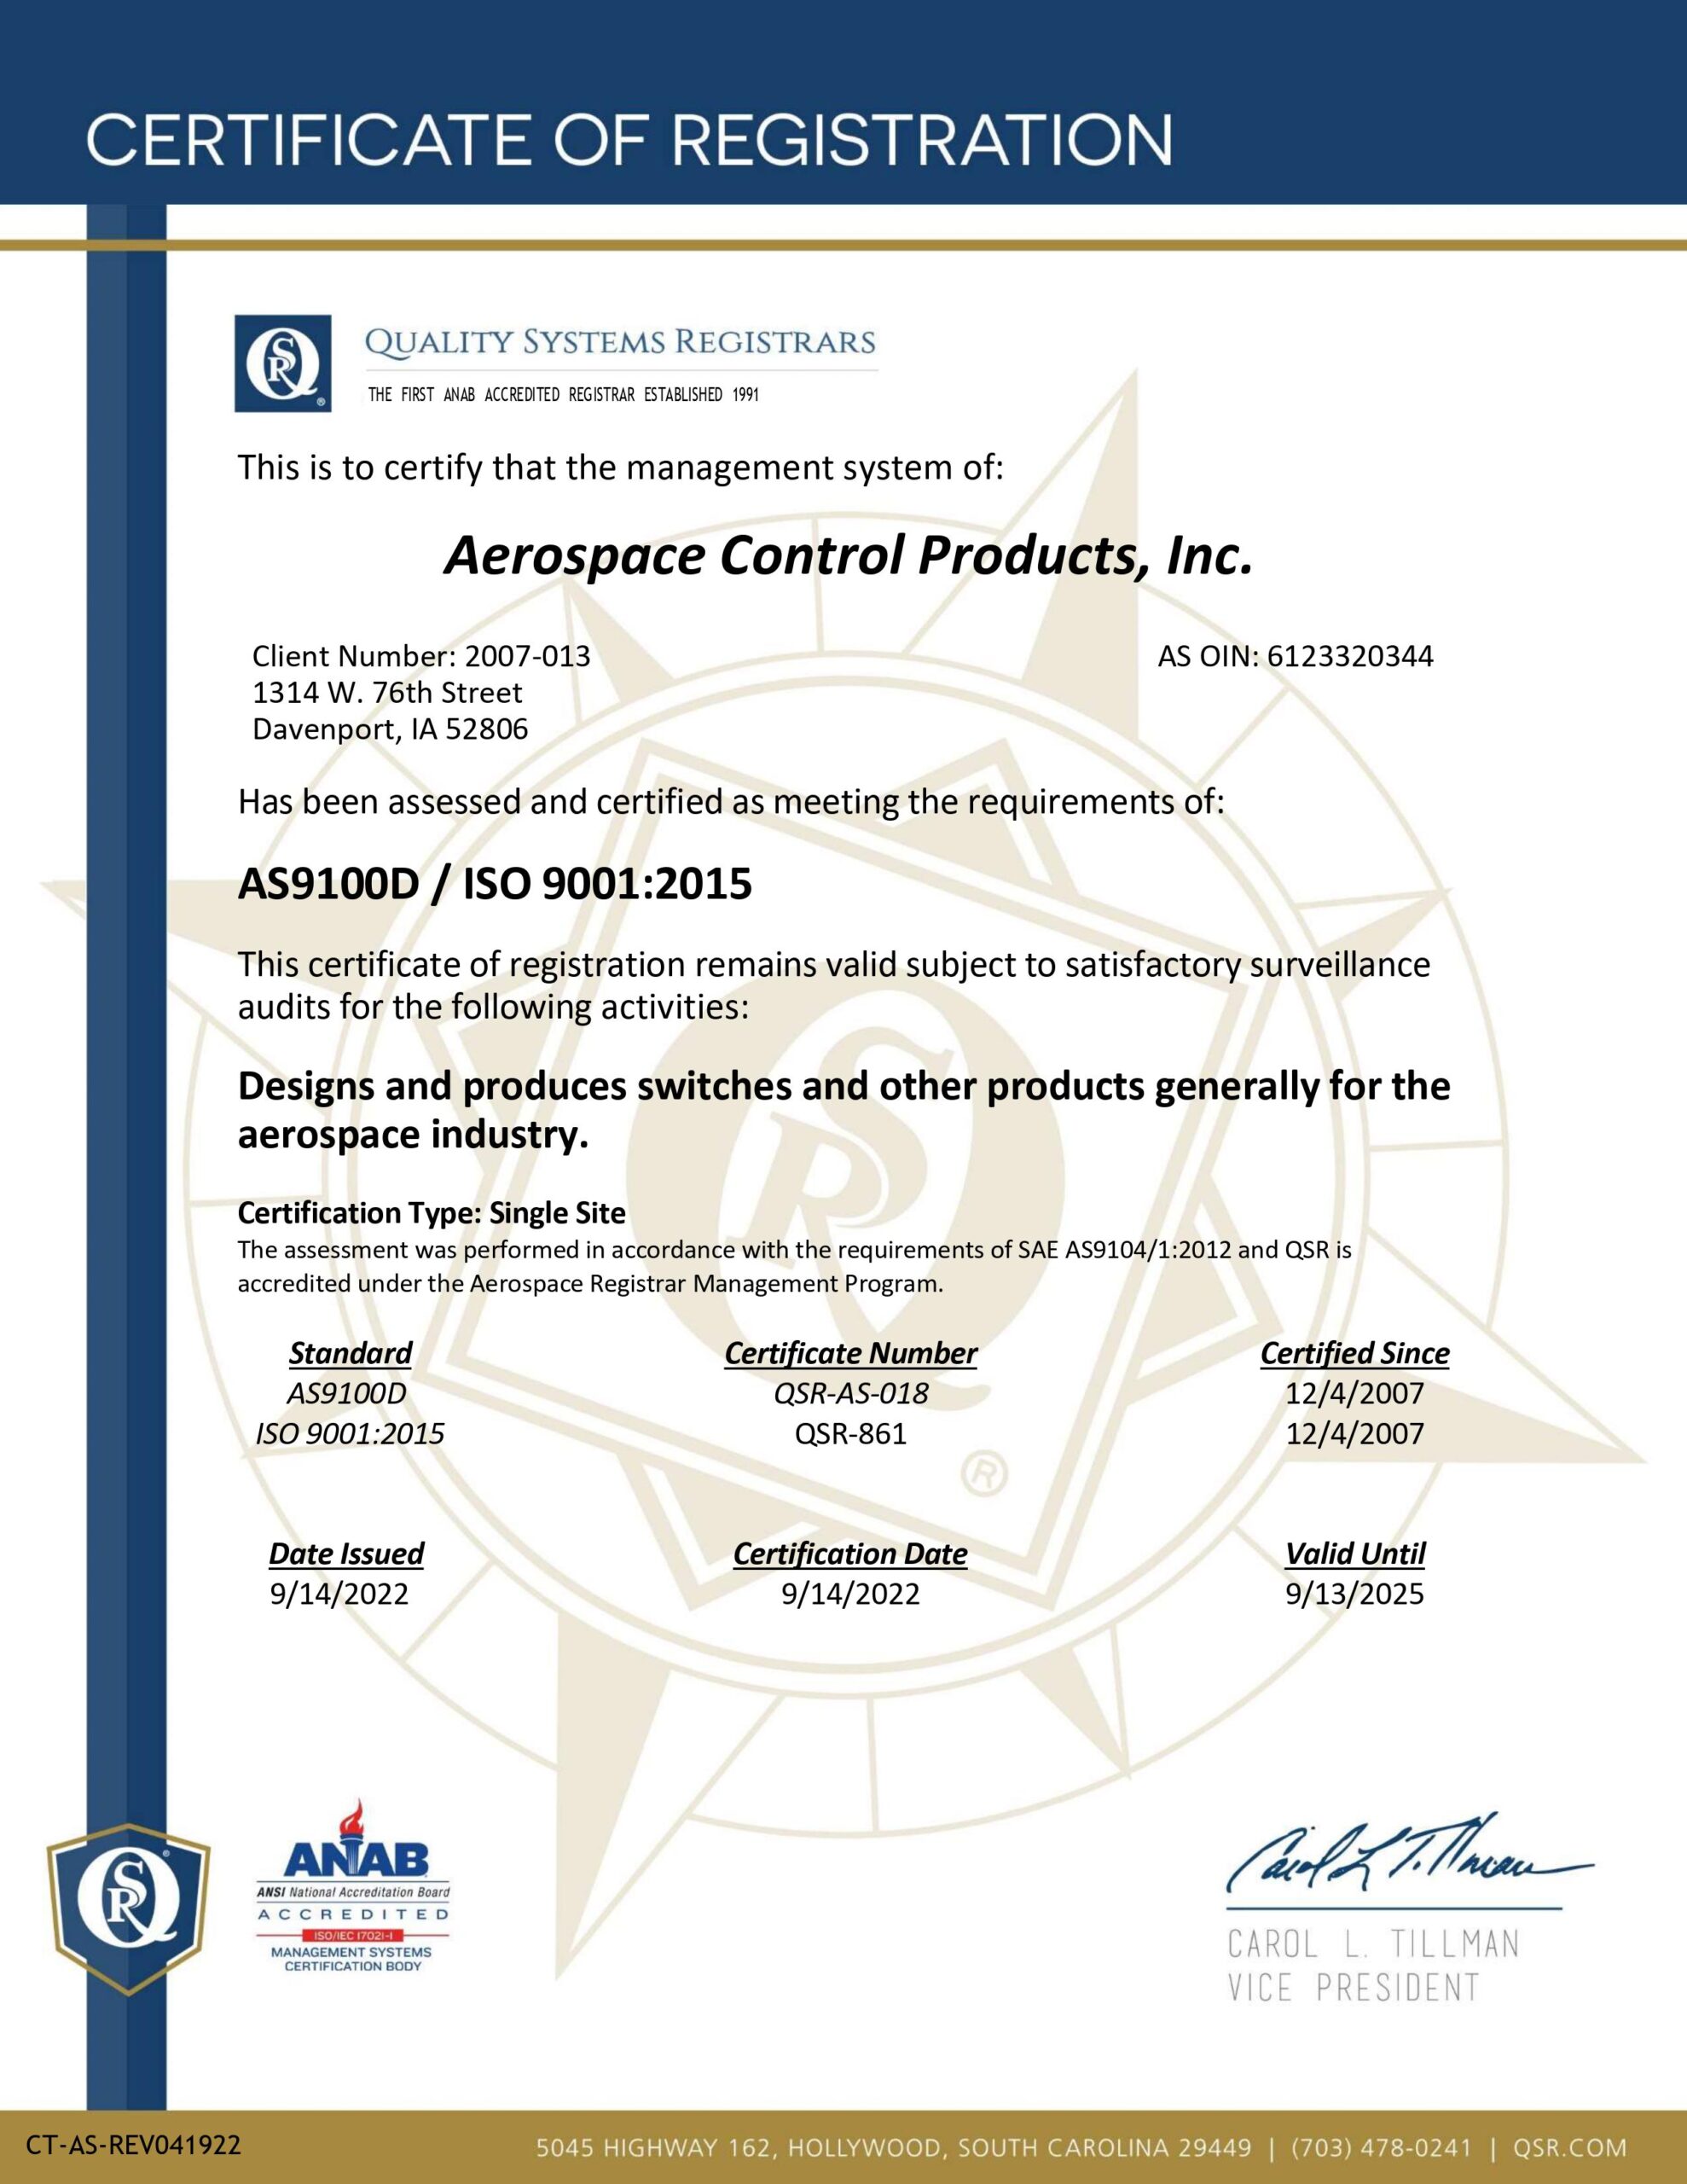 AS9100D & ISO 9001:2015 Certificate